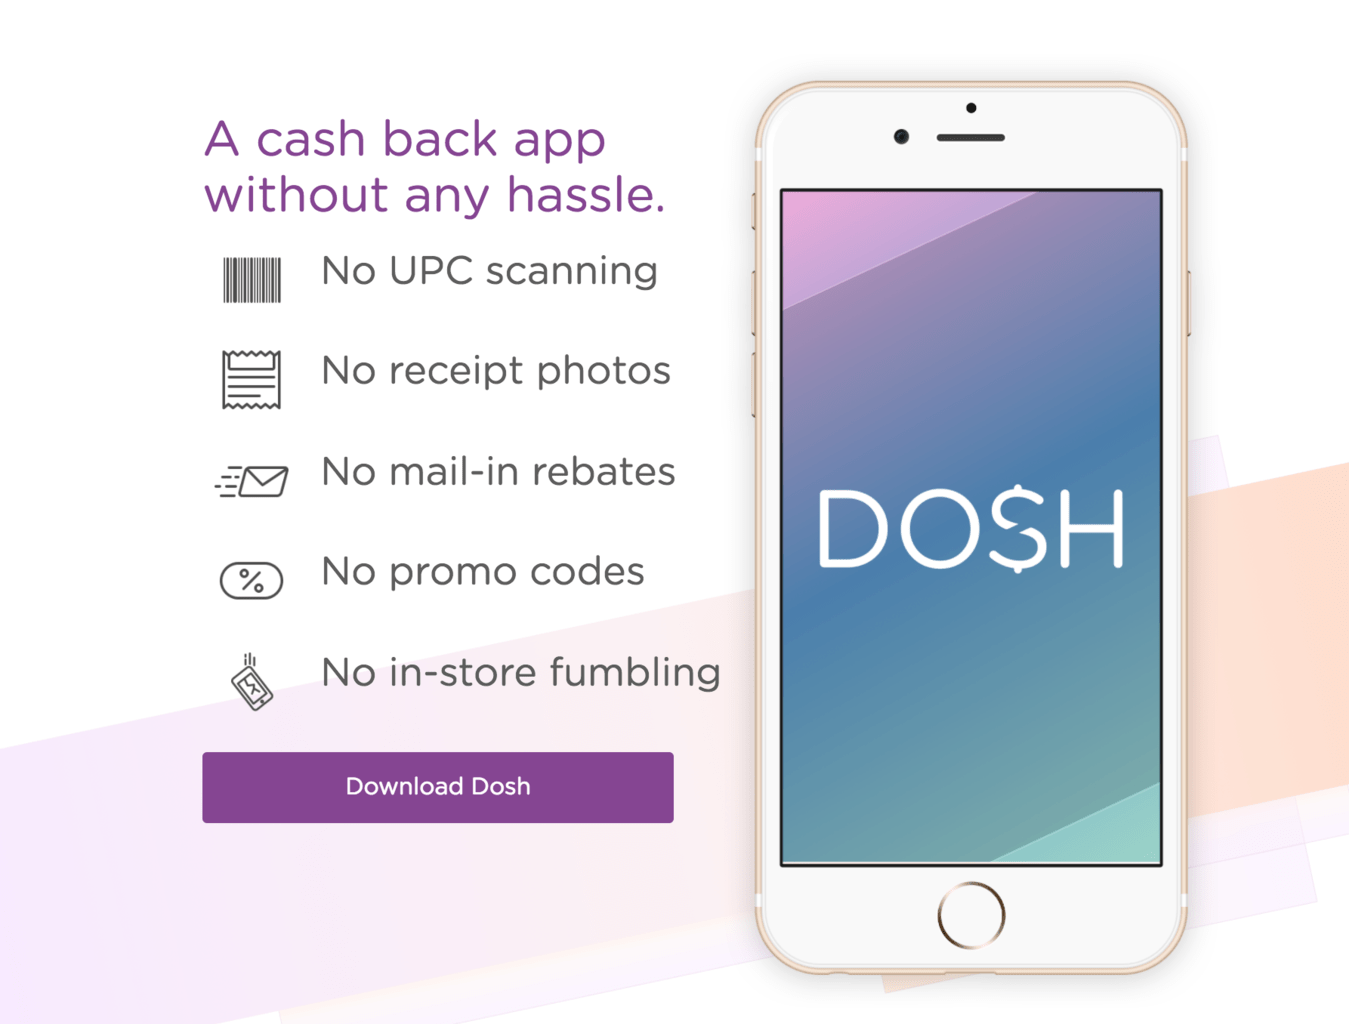 How Dosh saved me cash on our last trip